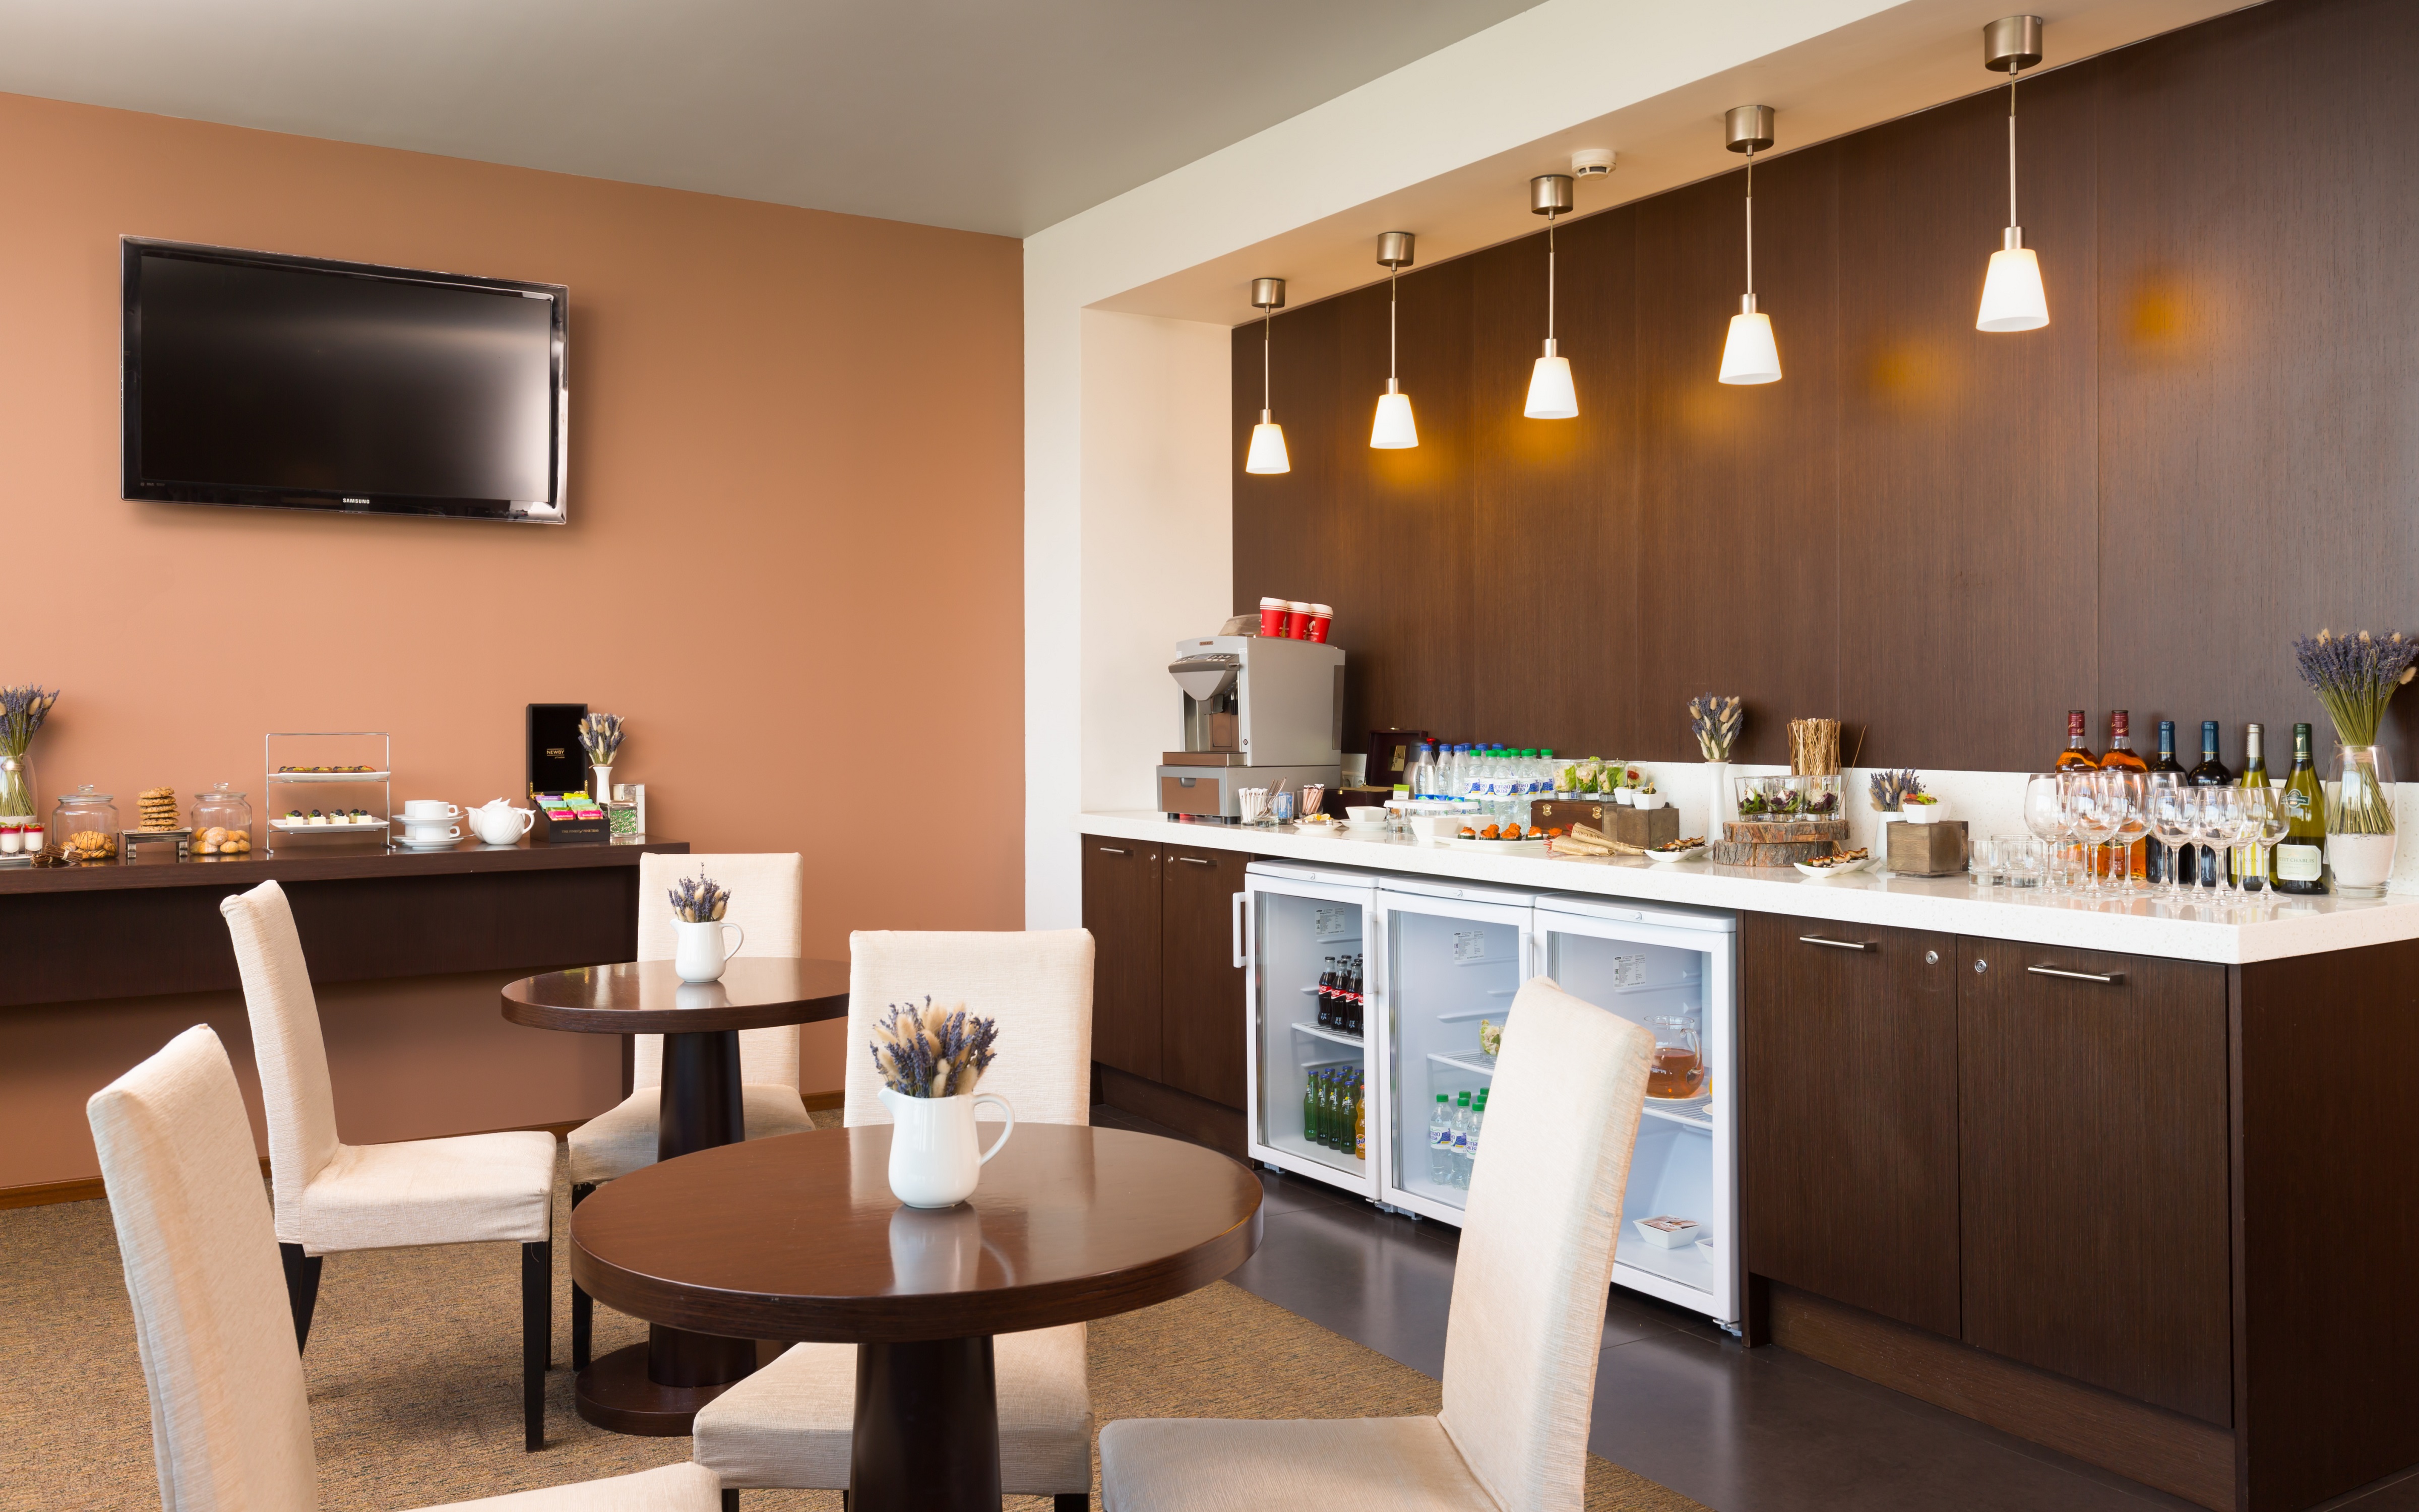 Two Round Tables With White Chairs, TV, and Refreshments on Counters in Executive Lounge  